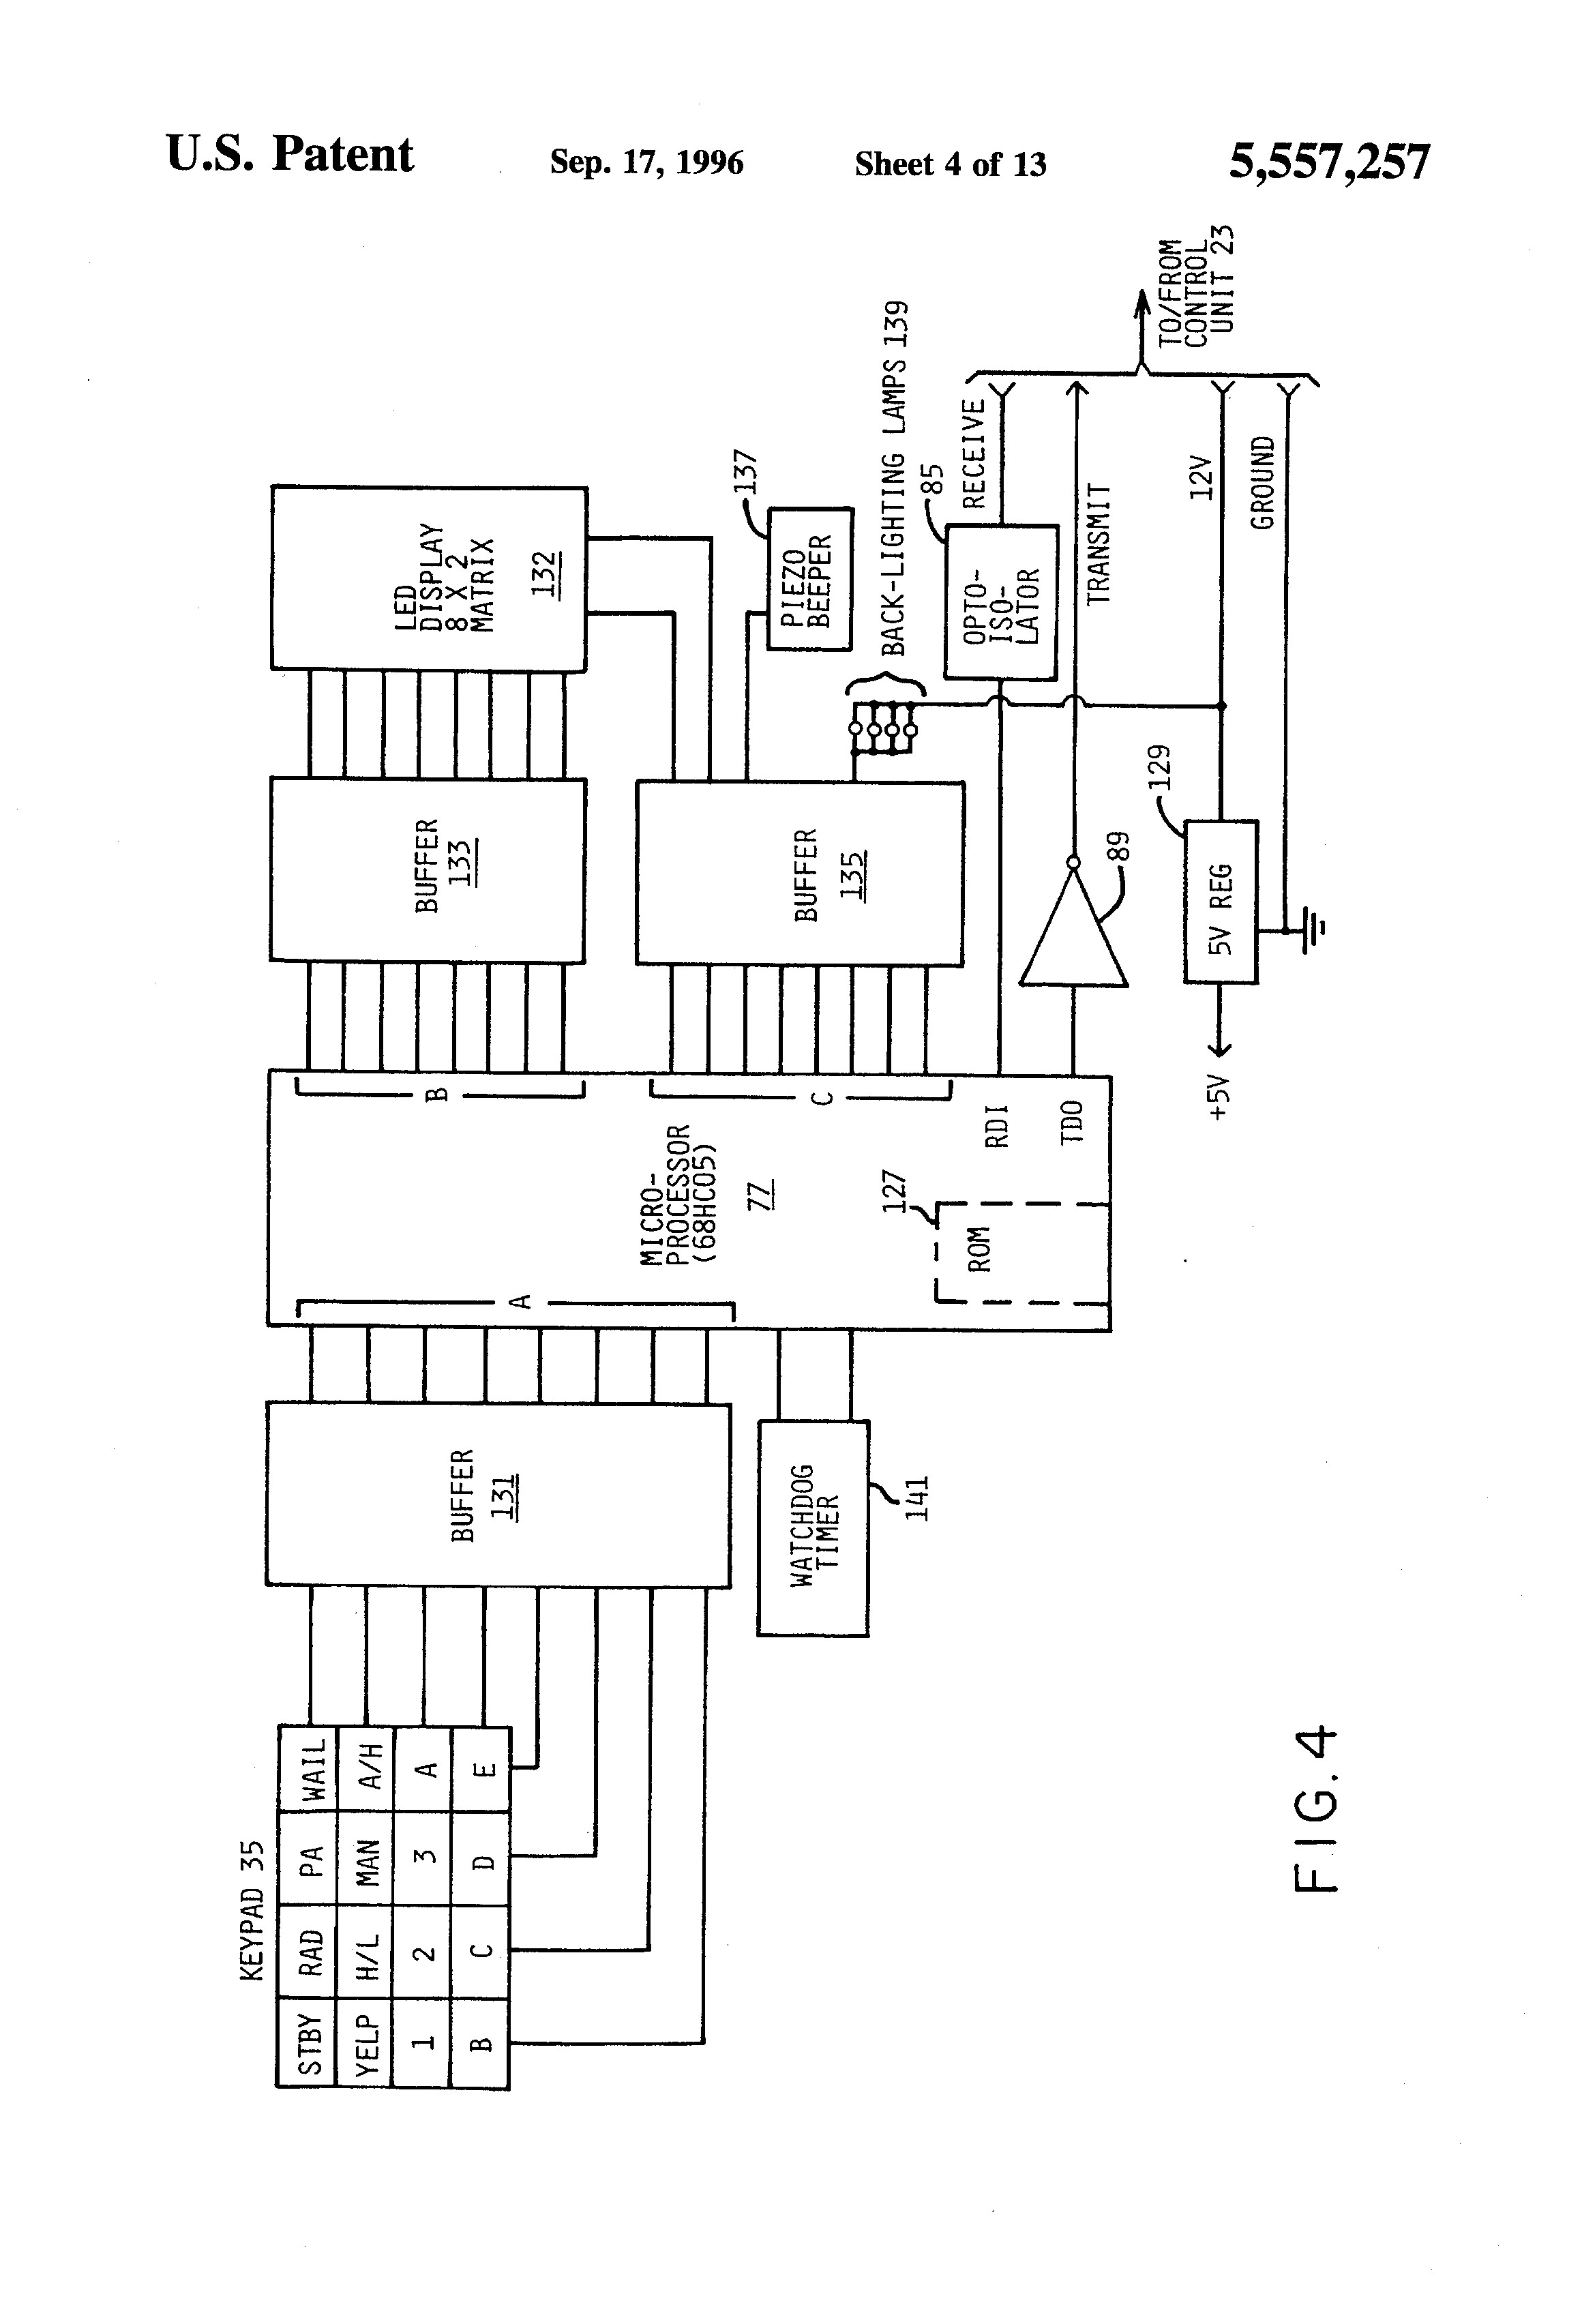 Federal Signal Corporation Pa300 Wiring Diagram - Allove - Federal Signal Pa300 Wiring Diagram